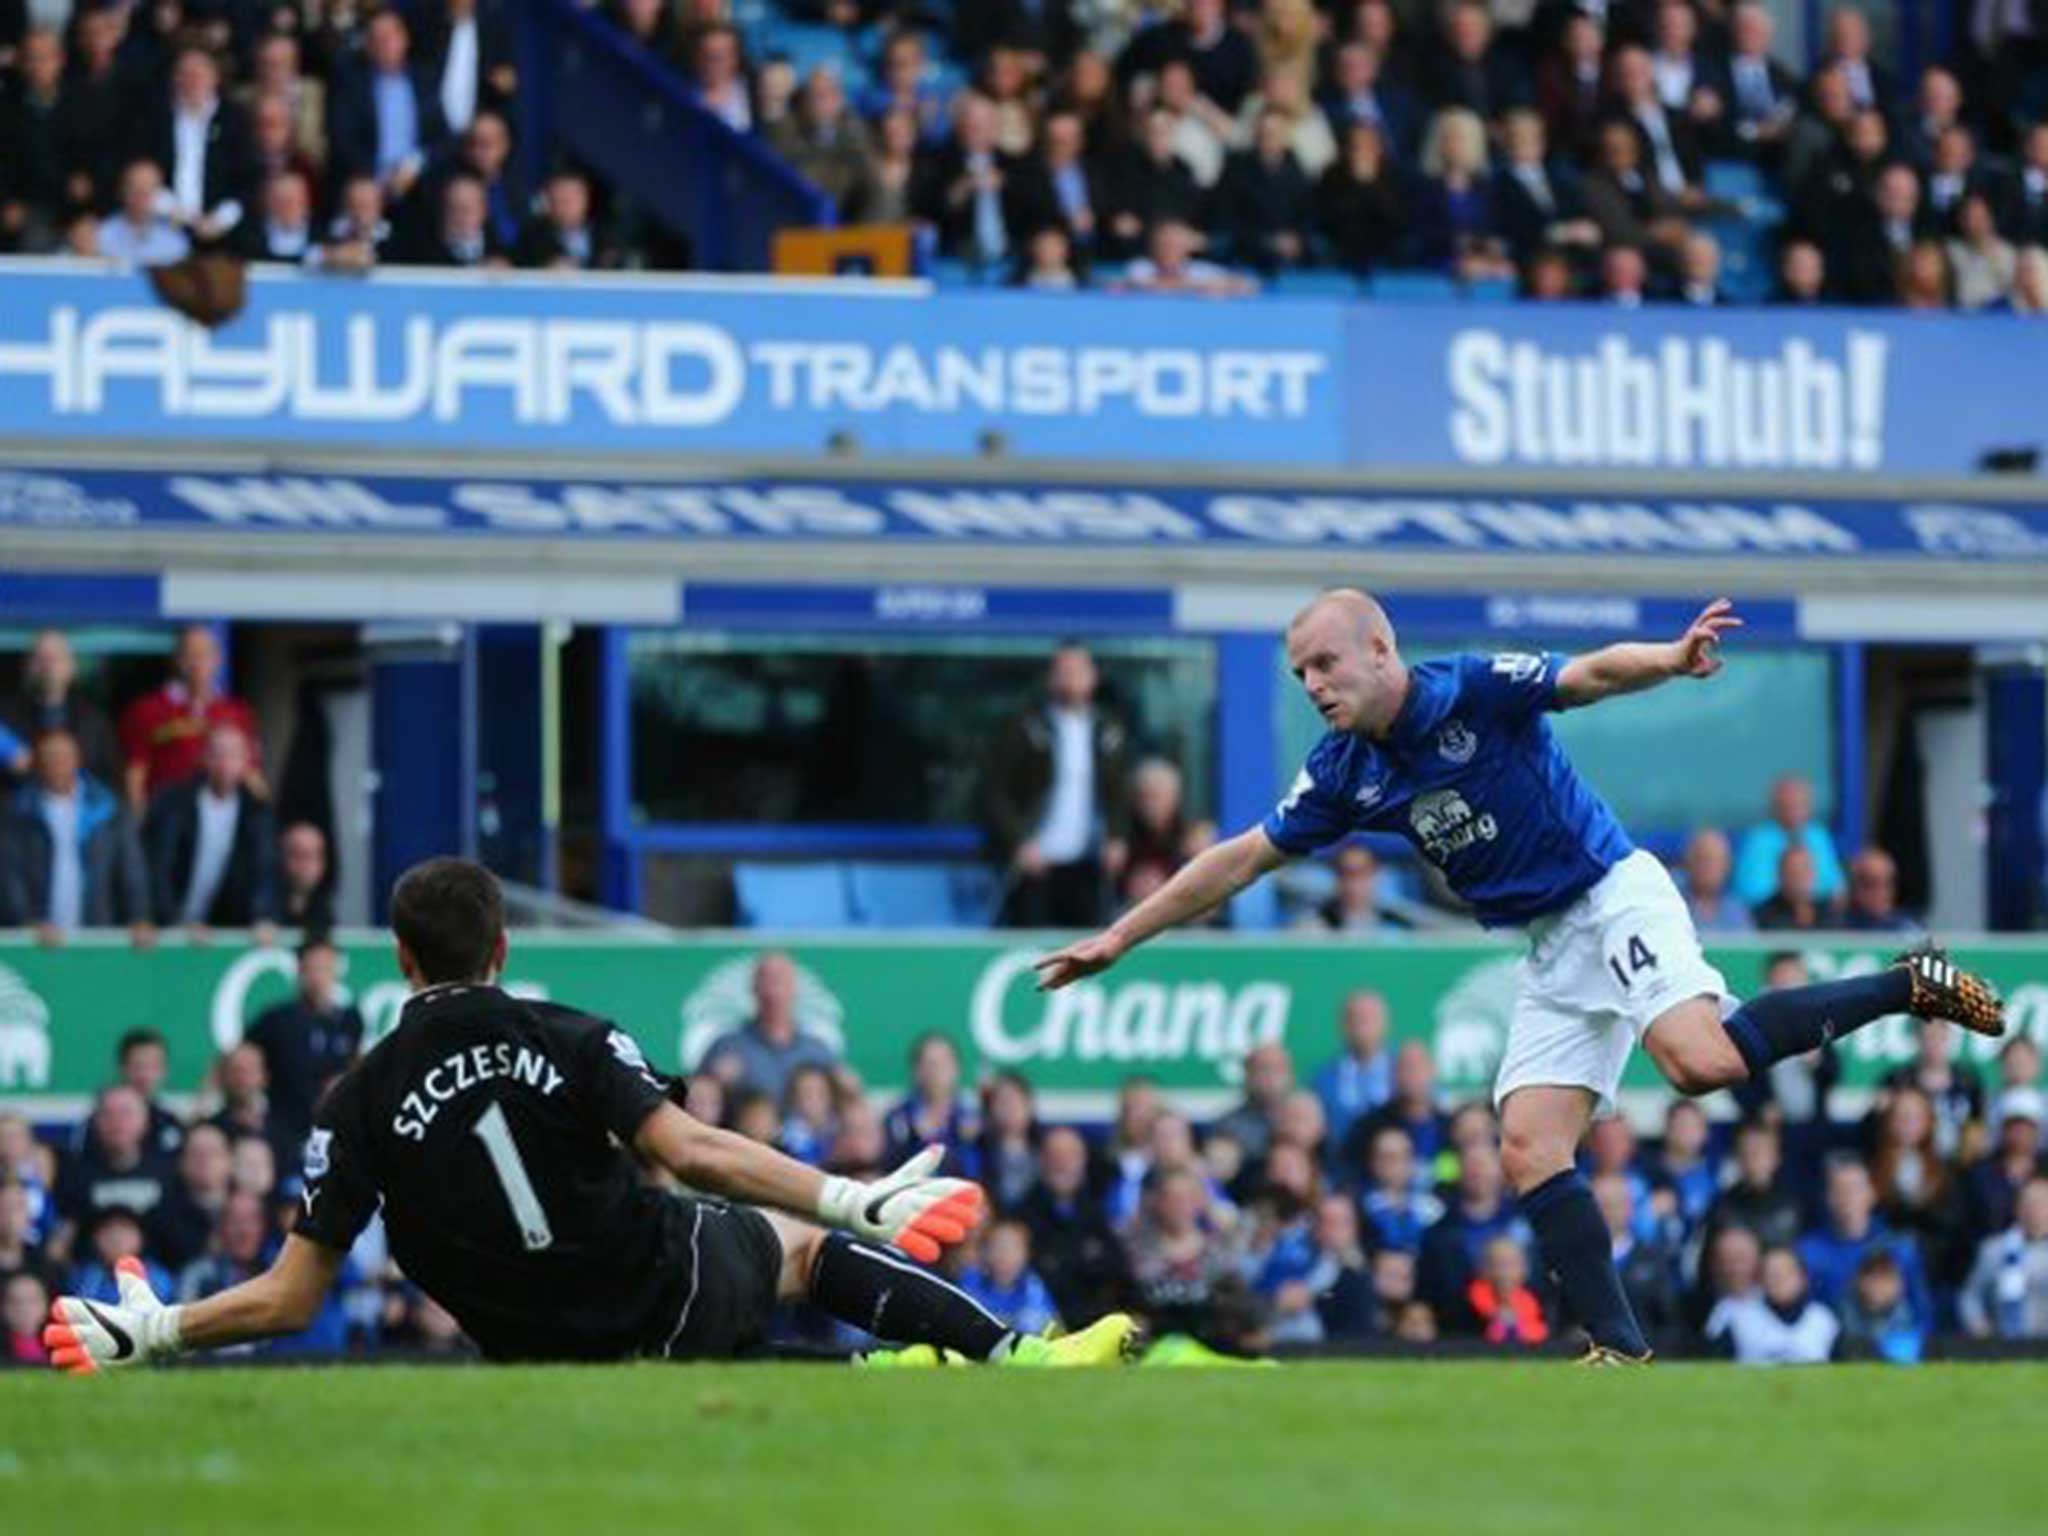 Just the ticket: Steven Naismith’s gift of free entry to the jobless puts FA top brass to shame